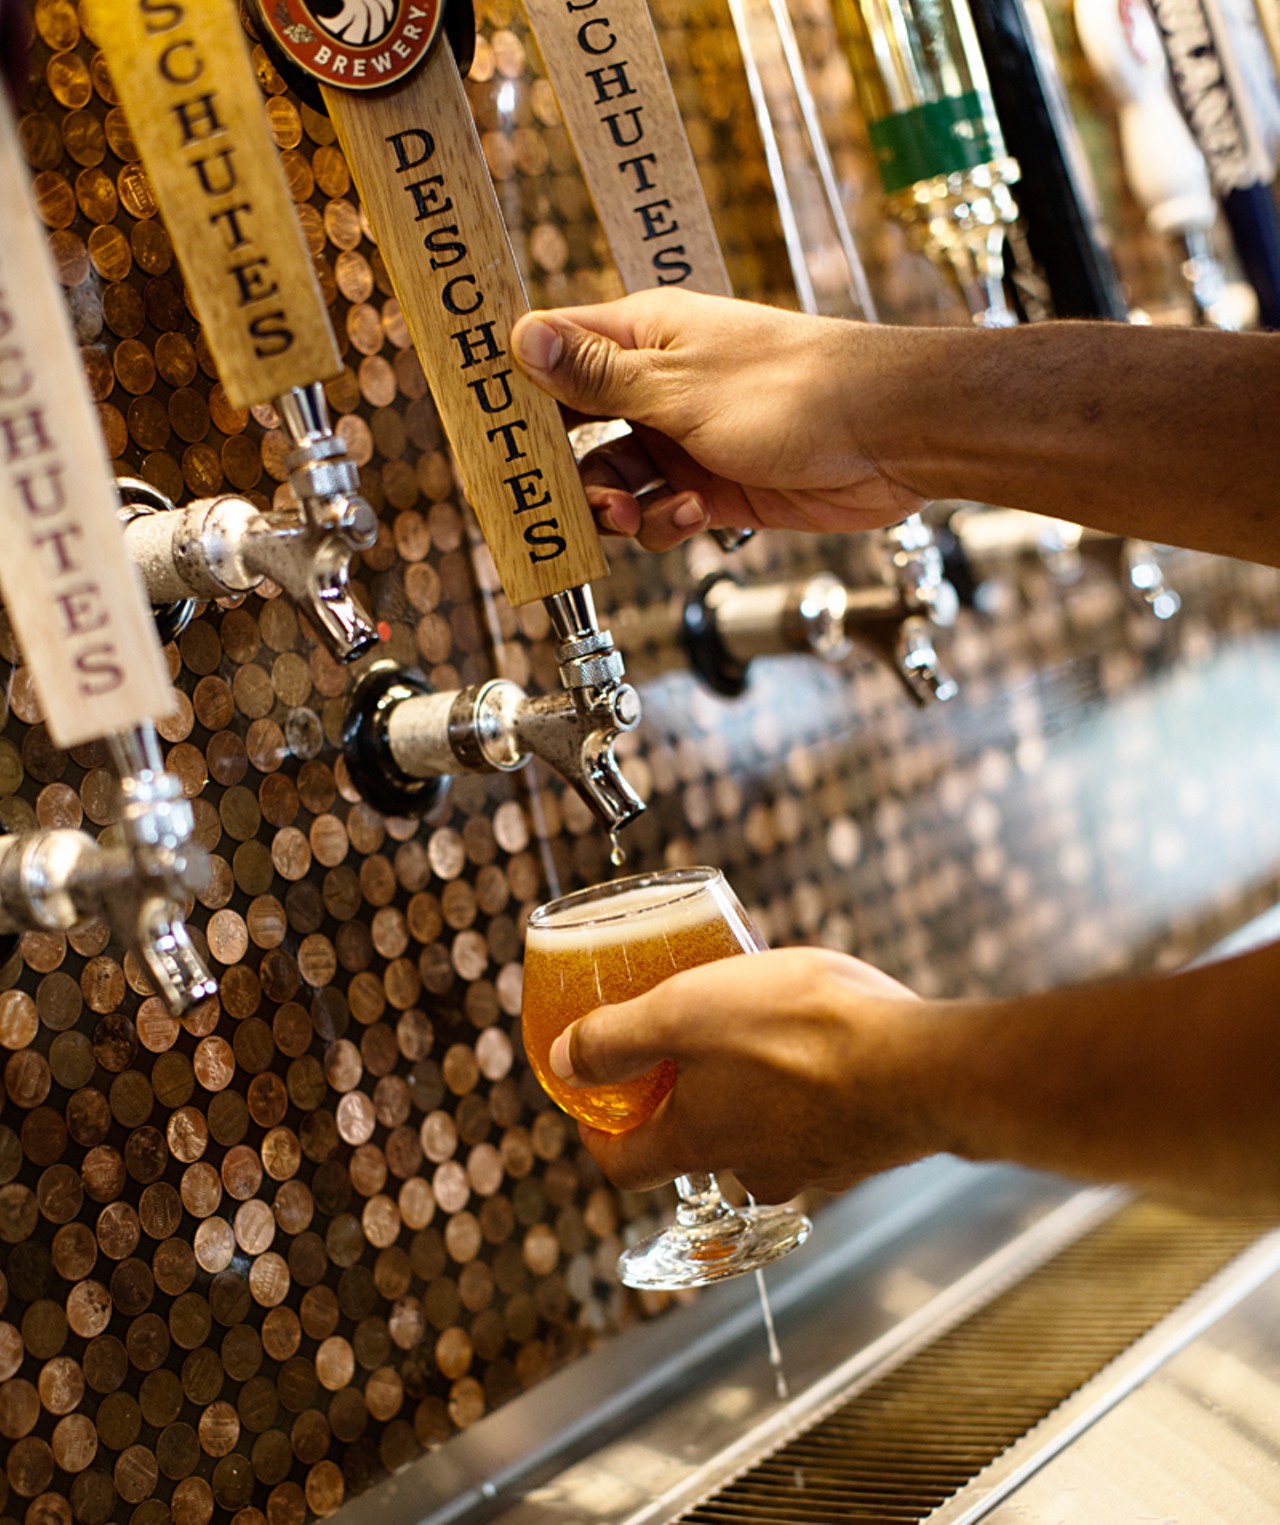 The downtown Flying Saucer boasts 80 beers on draft and 150 bottled selections.